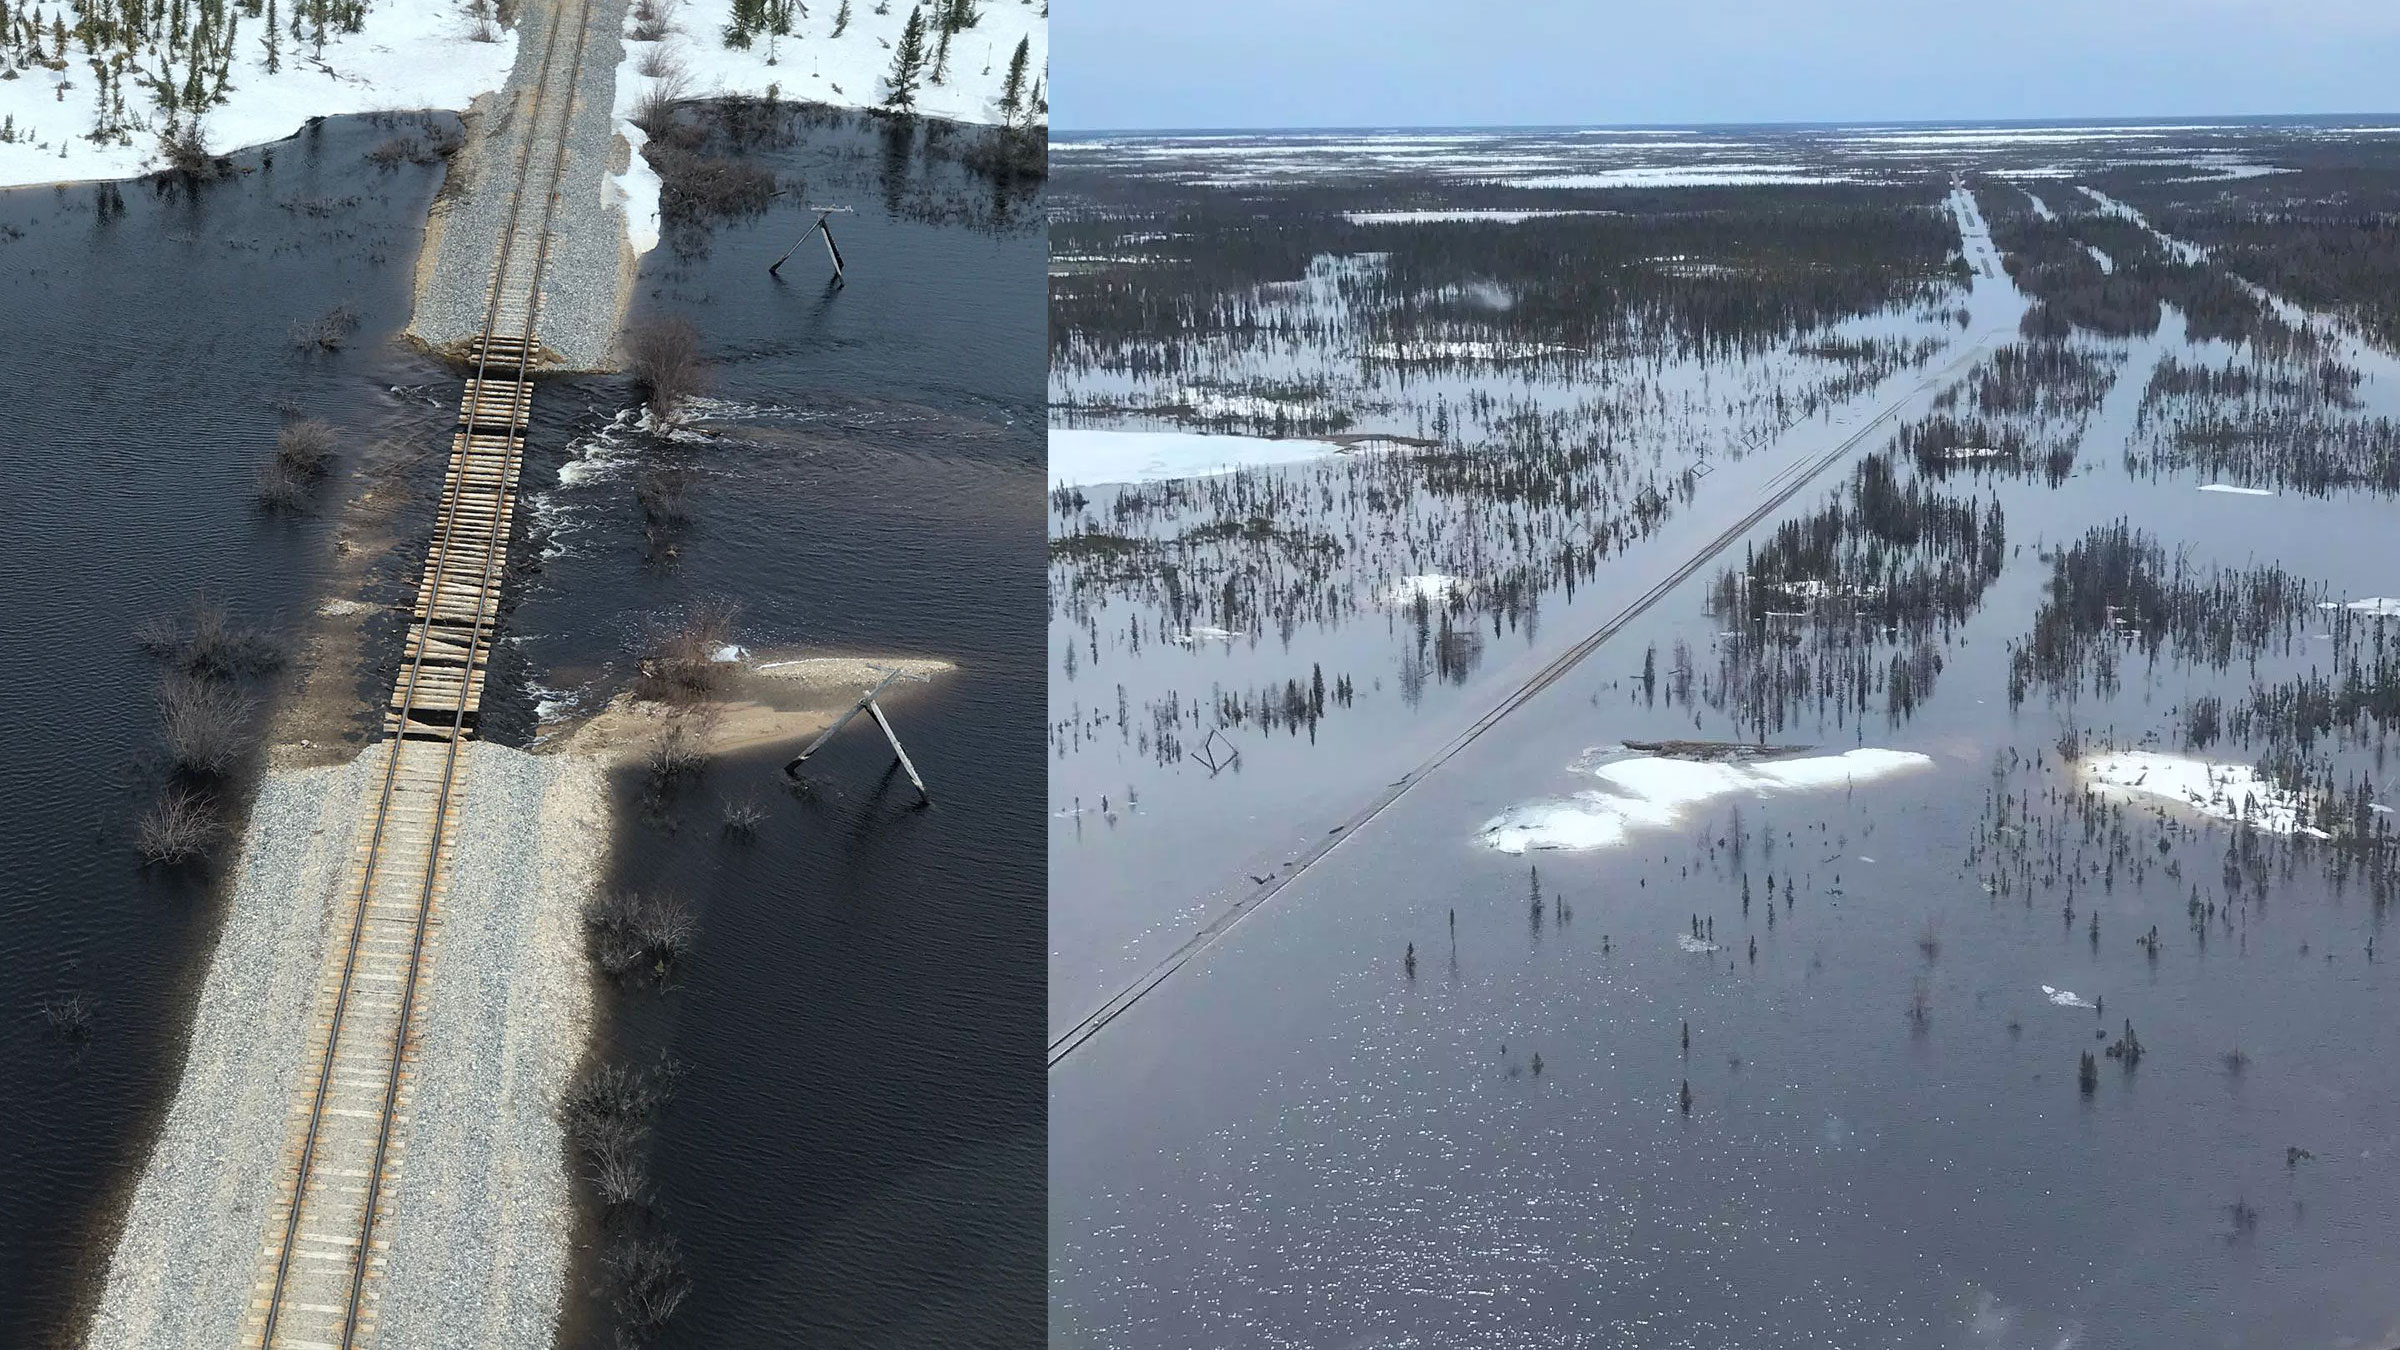 Photo of flood damage to Churchill railway line, released by Omnitrax.